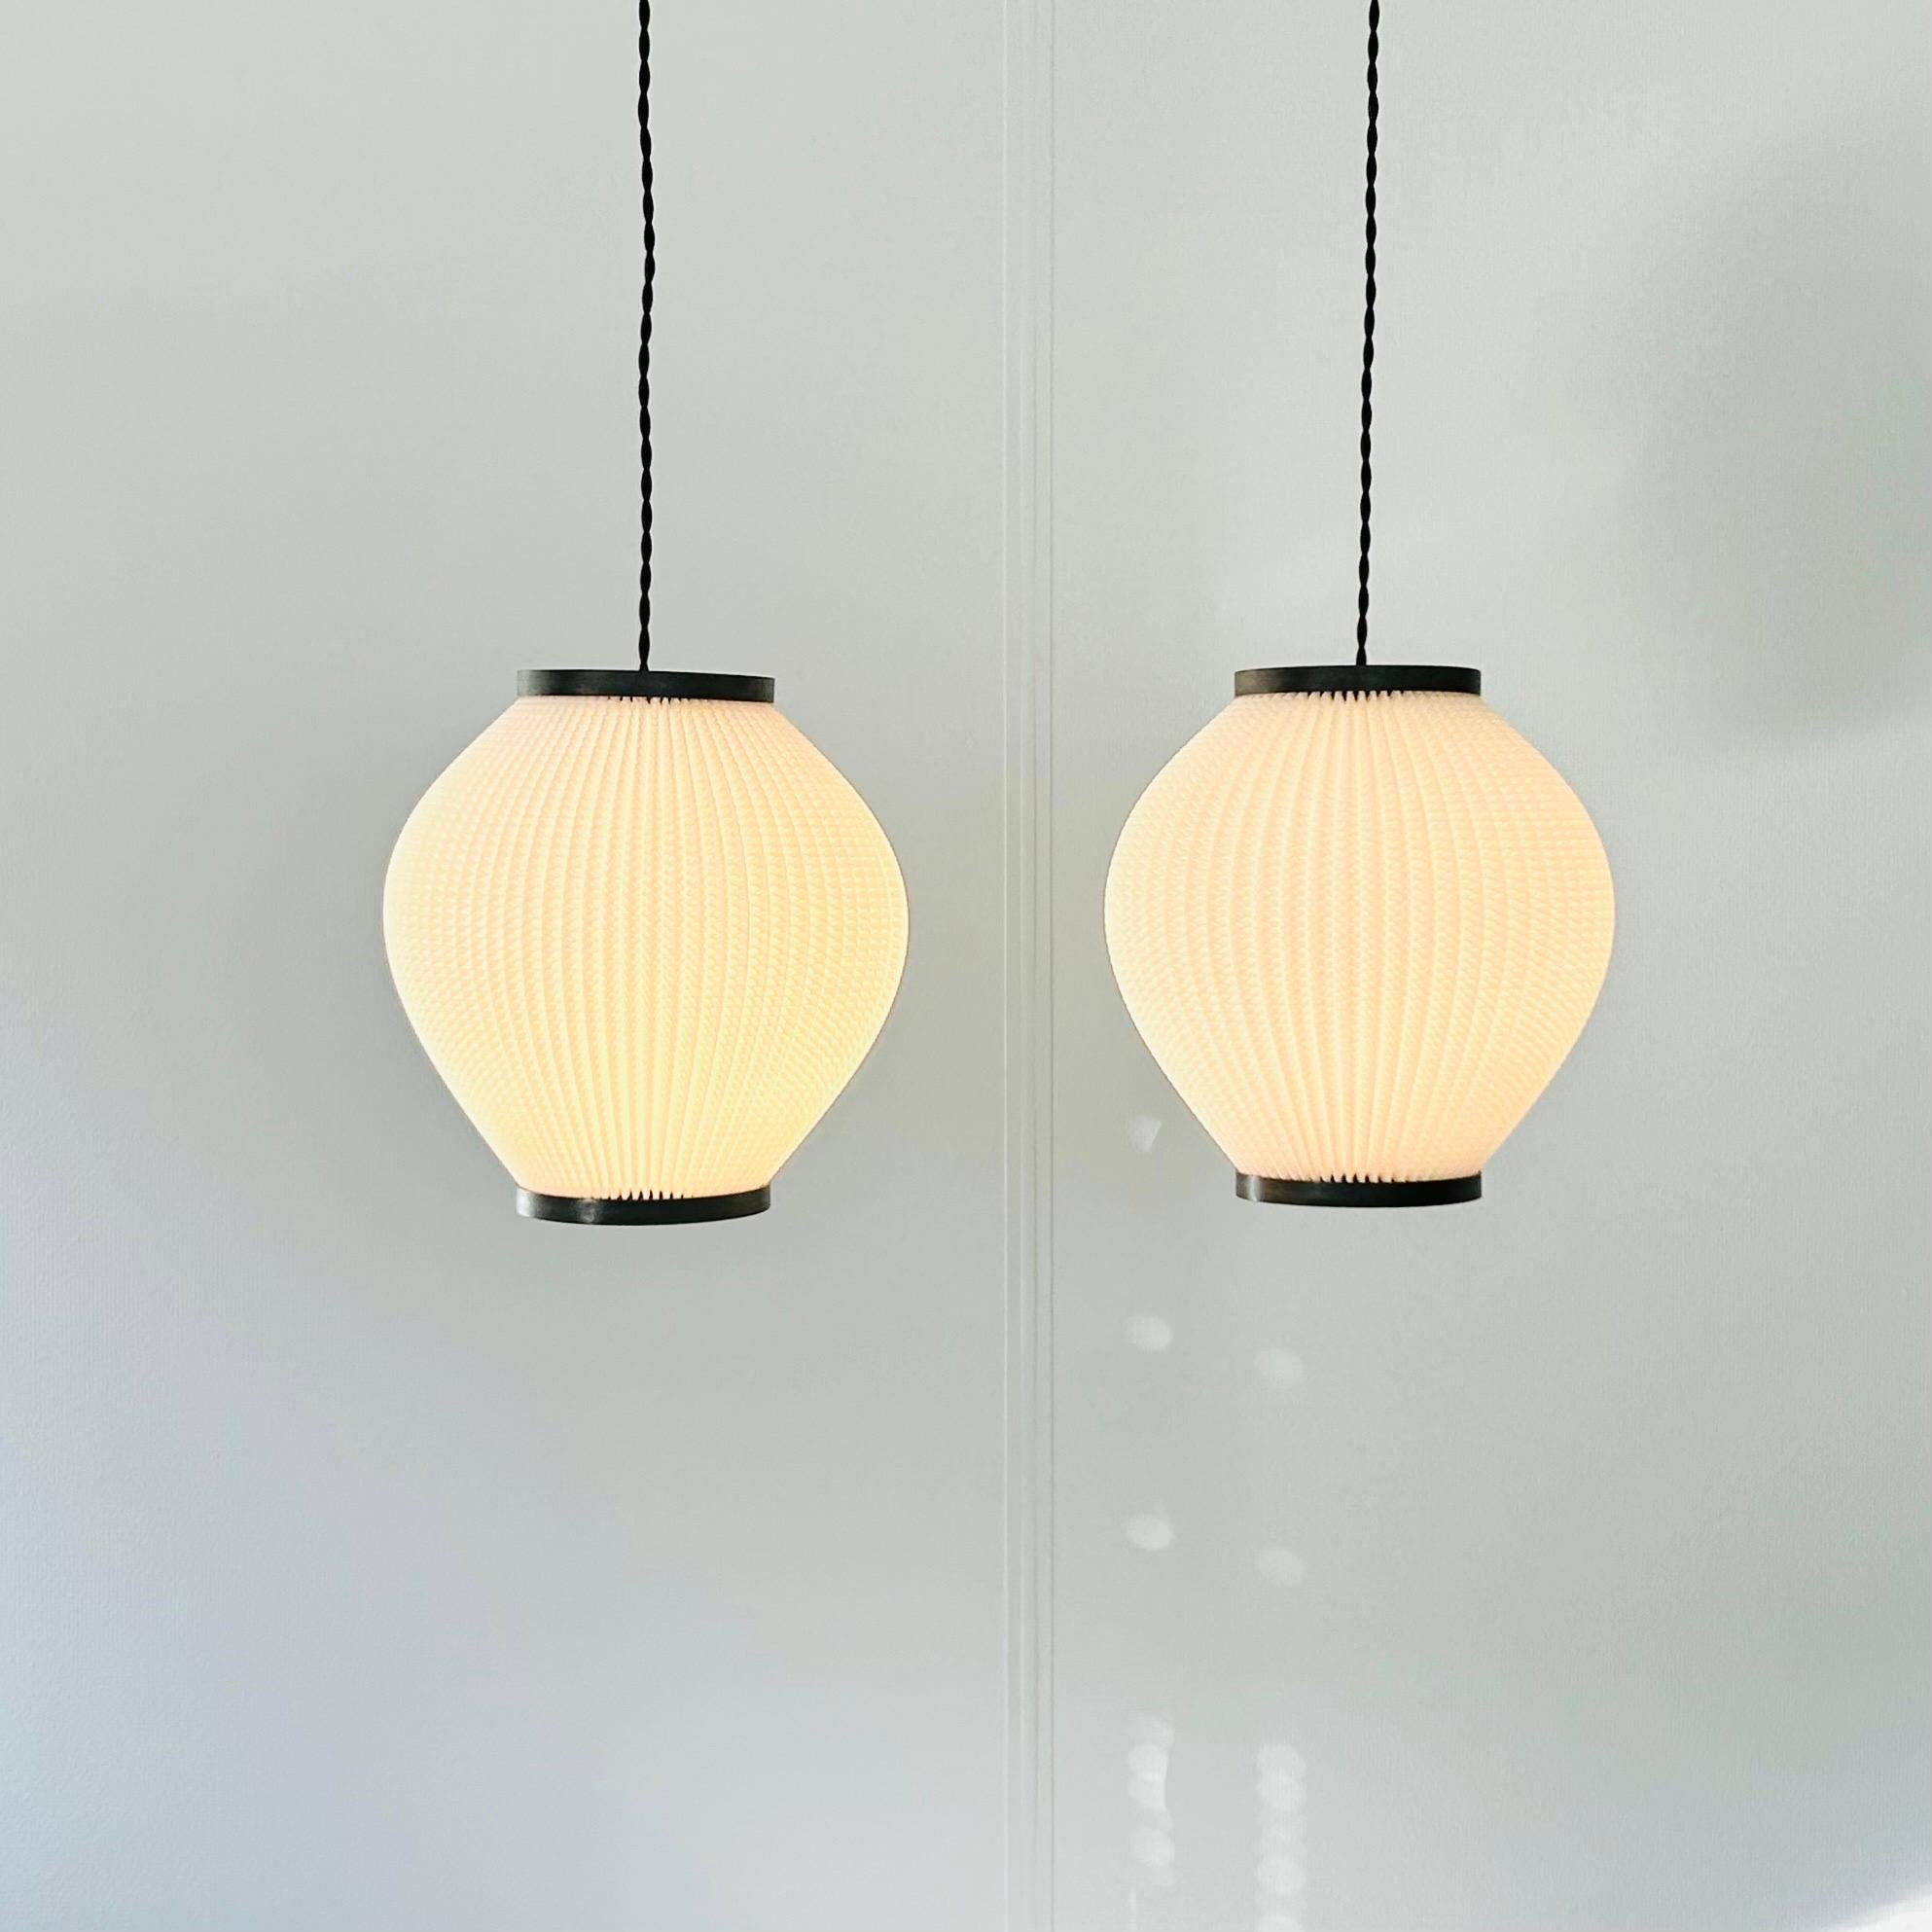 A pair of pendant lights designed by Lars Ejler Schiøler for P.J. Høyrup in 1950s, later Høyrup Lightning. The style is called 'Pearlshade' and is one of the icons of Lars Ejler Schiøler. Beautiful, architectural lamps in antistatic plastic.

The